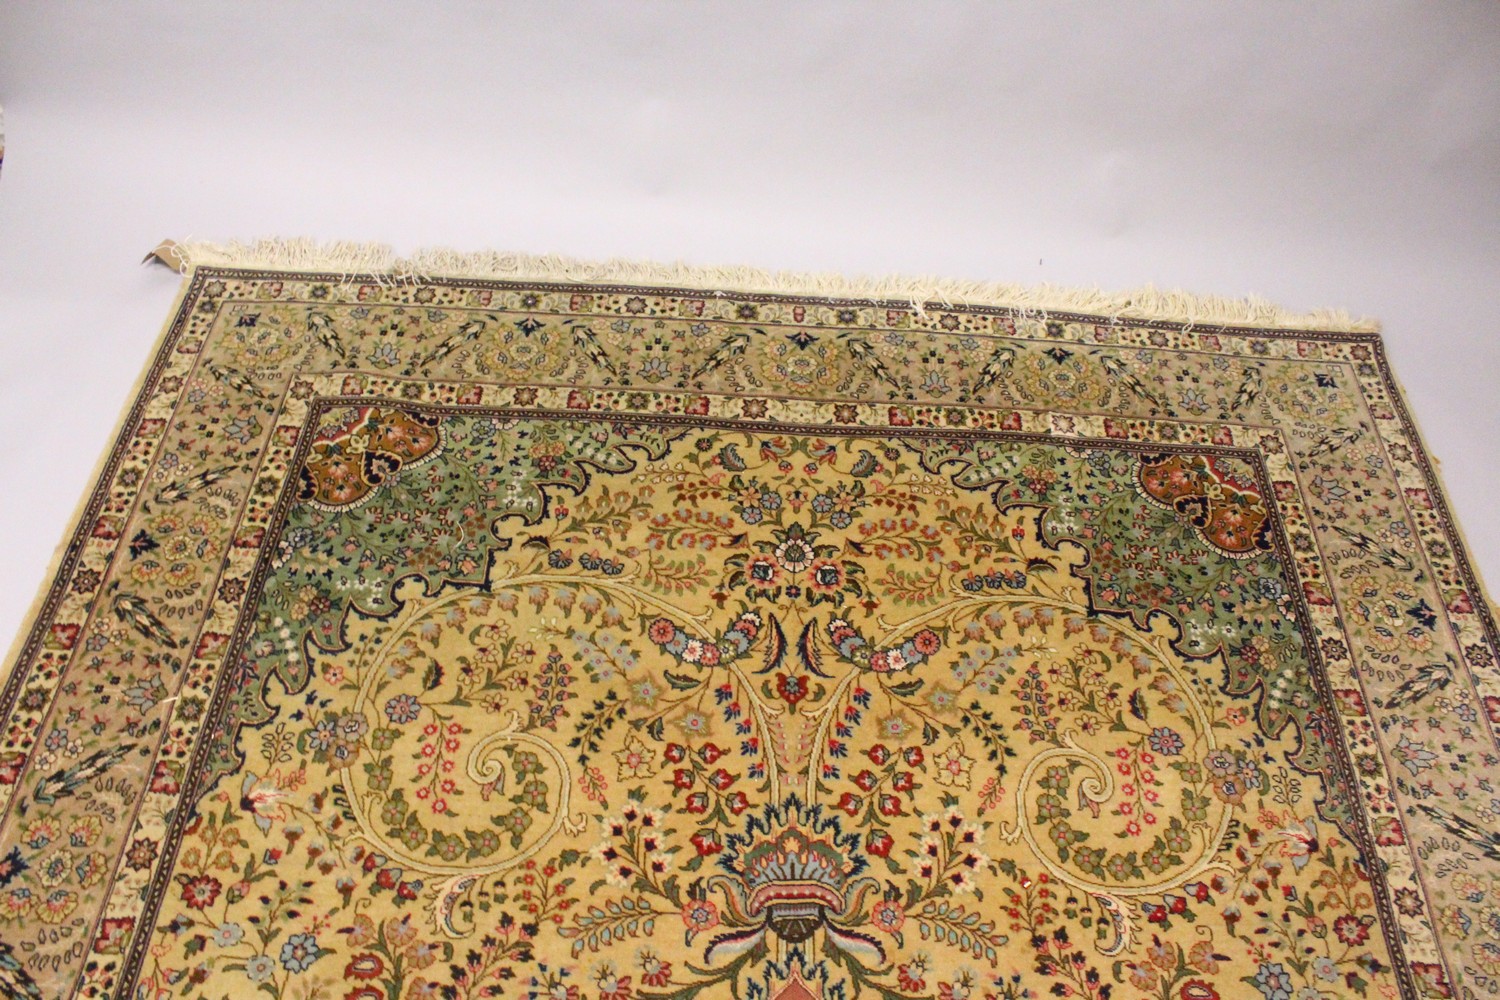 A GOOD PERSIAN CARPET, 20TH CENTURY, beige ground with central floral panel within a similar border. - Image 5 of 24